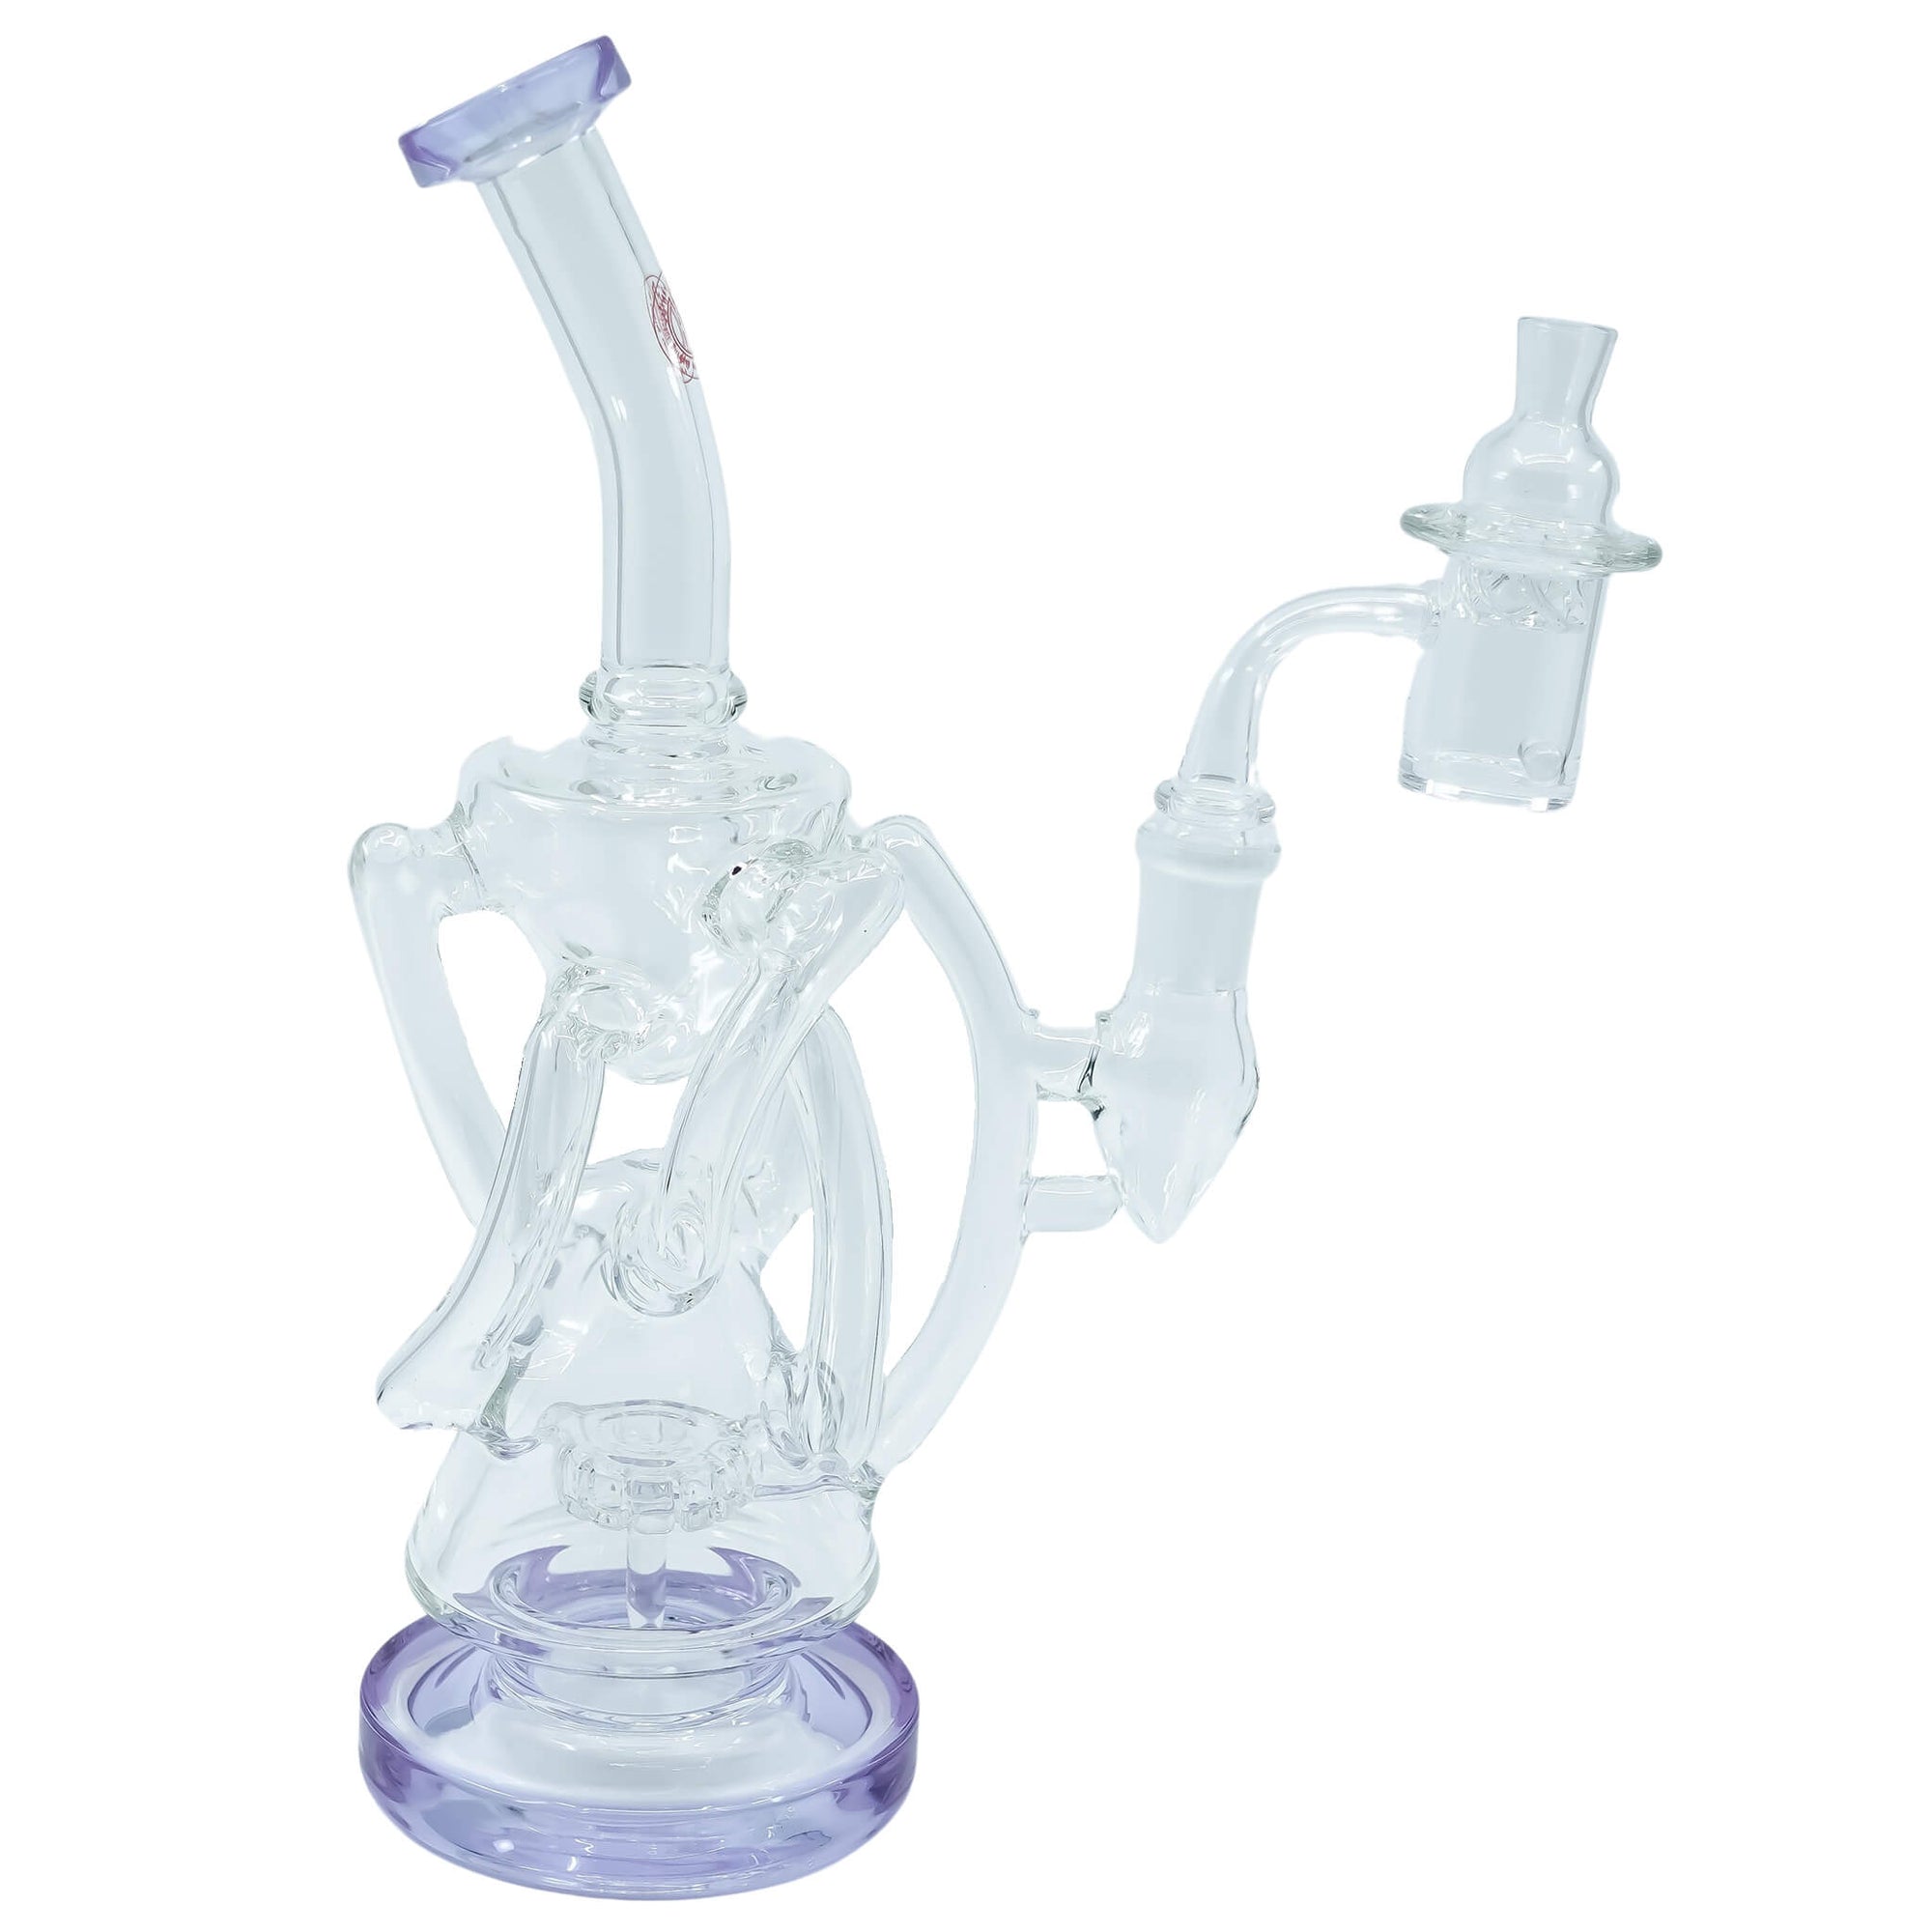 Trifecta 25mm Handmade Joint Complete Dabbing Kit #1 | Purple With Quartz Pearls View | DW